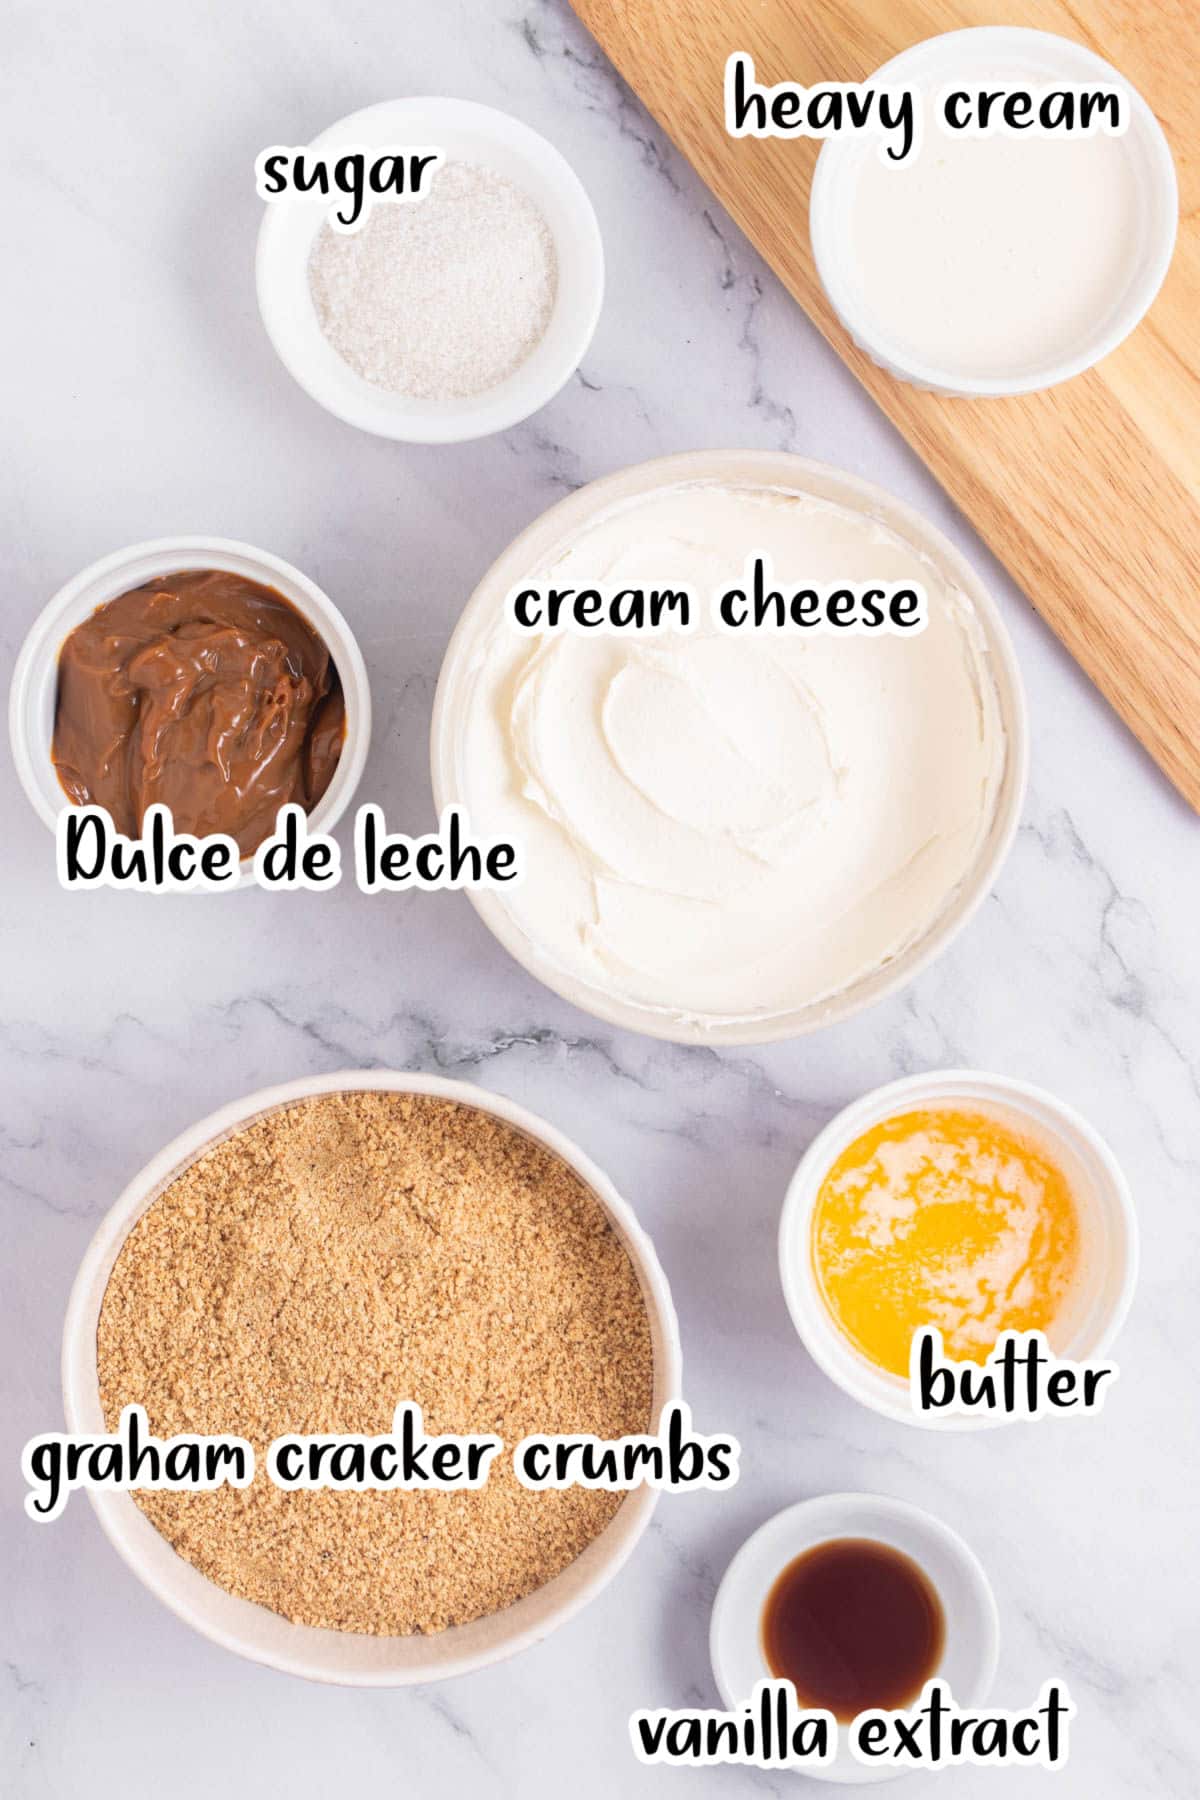 Labeled ingredients for cheesecake bars.